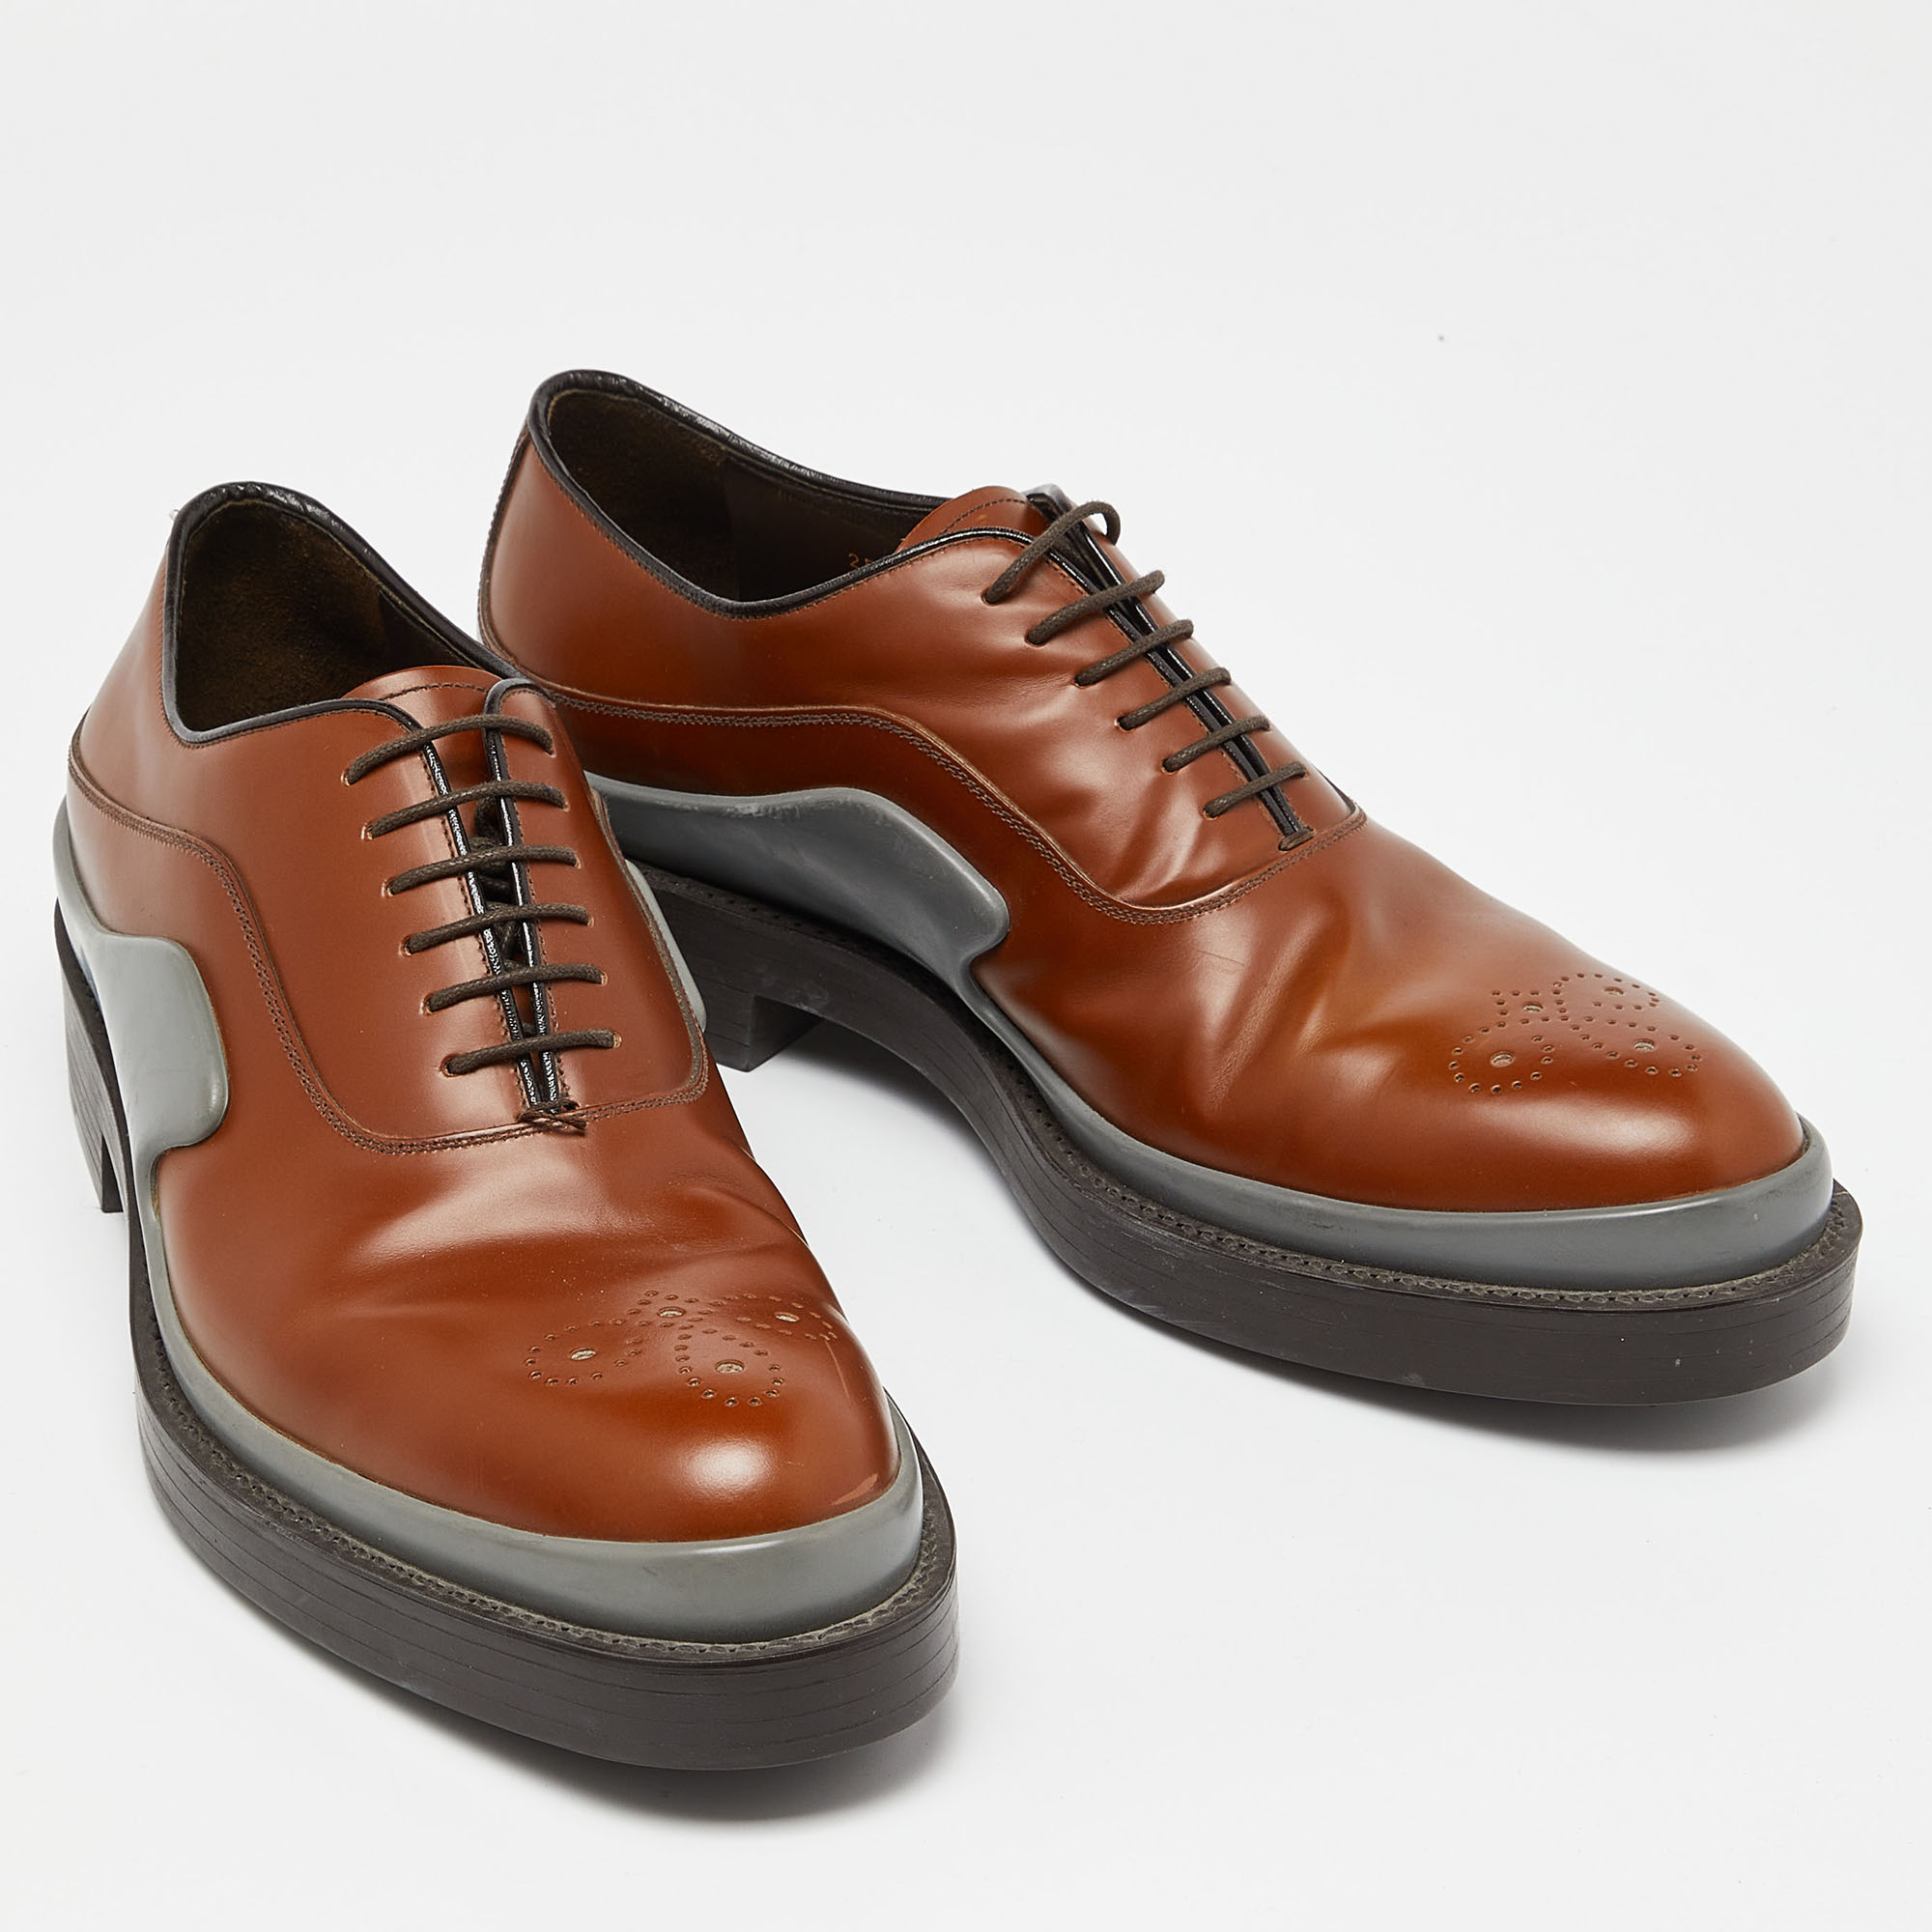 Prada Brown Leather Lace Up Oxfords Size 43.5